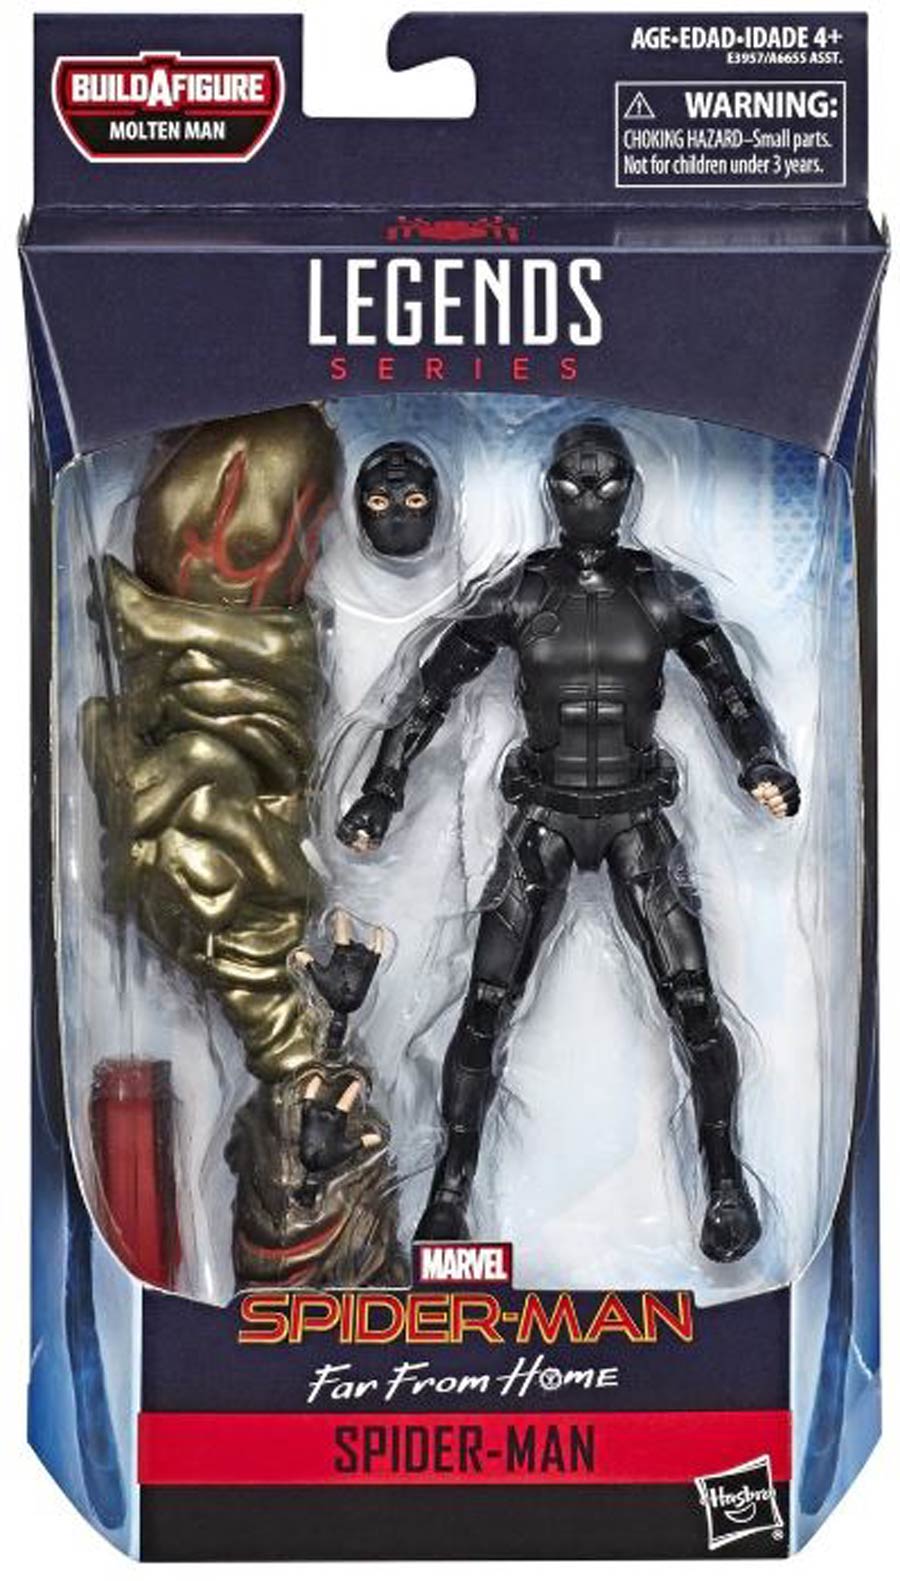 Spider-Man Far From Home Legends 2019 6-Inch Action Figure - Spider-Man (Stealth Suit)